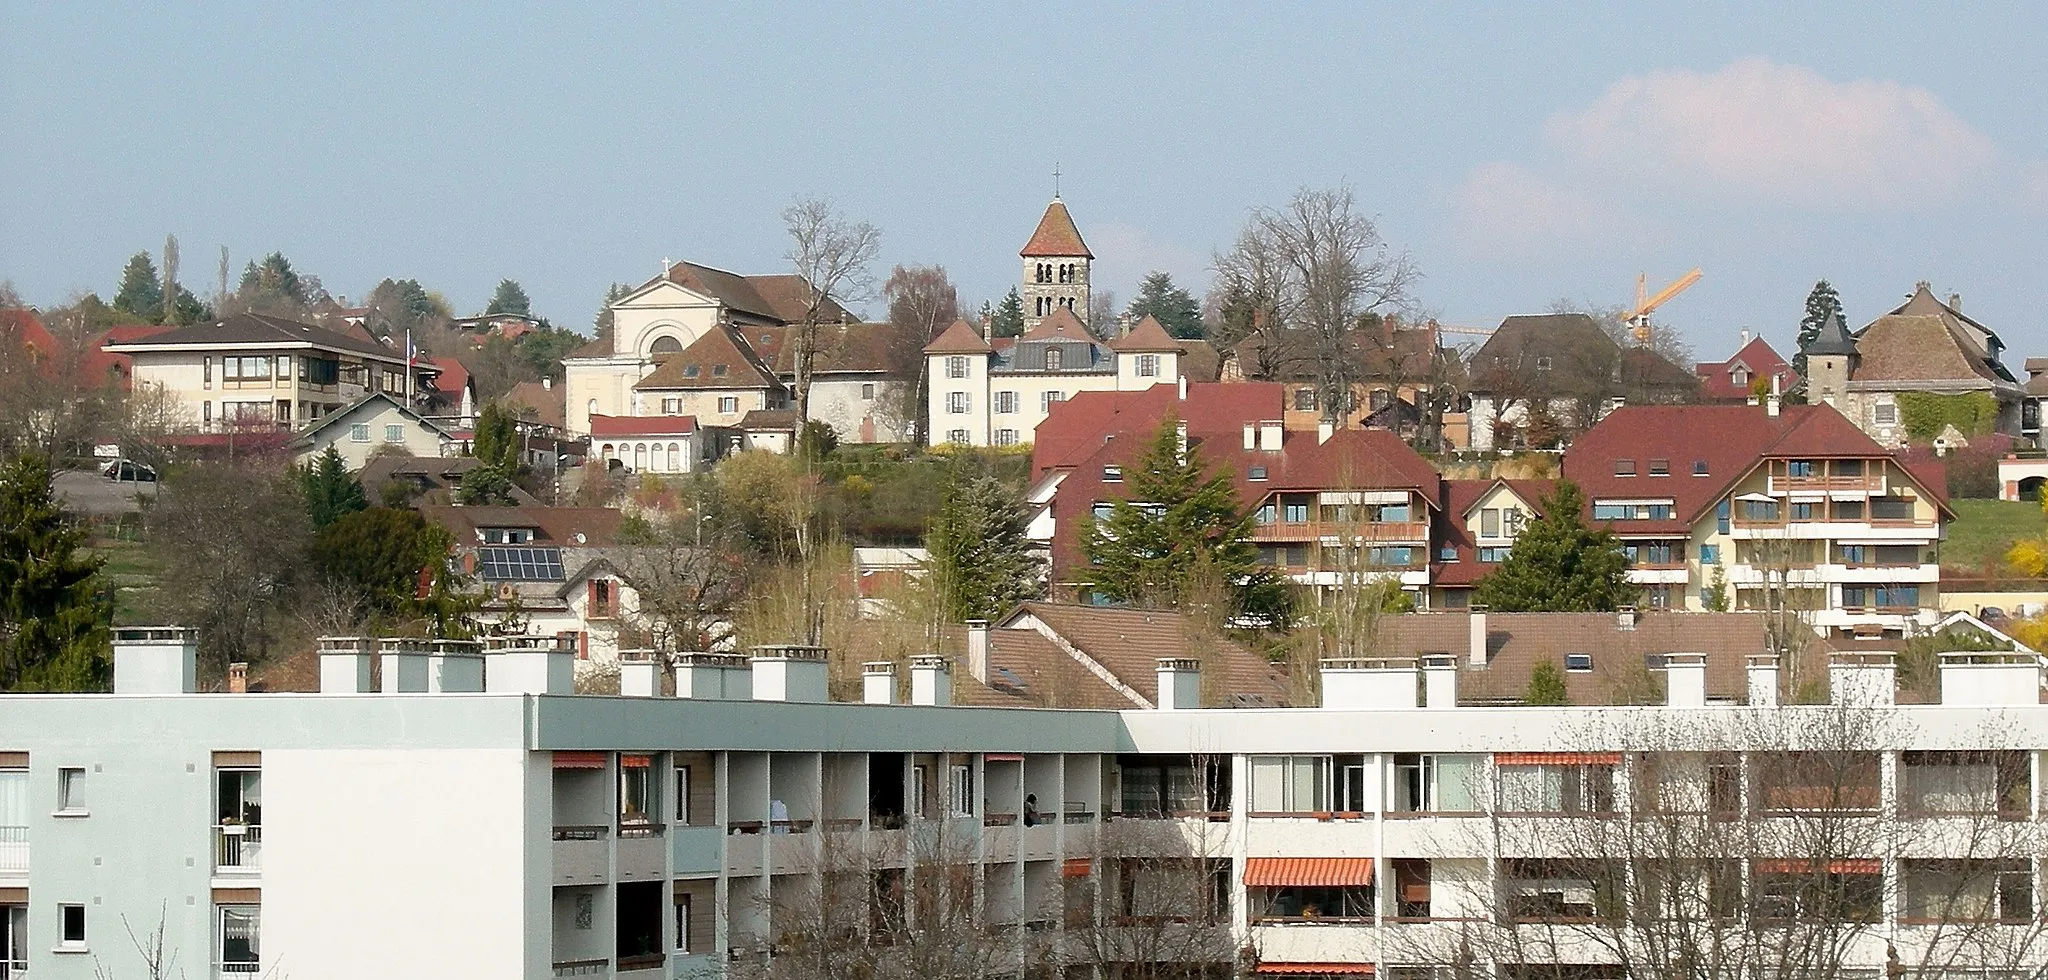 Photo showing: On the top of the hill, the principal place of en:Annecy-le-Vieux (en:Haute-Savoie, en:France) overlooks the Clarines'neighborhood. From left to right :
- On the far left, Annecy-le-Vieux City hall
- Church of Saint-Laurent
- Annecy-le-Vieux's bell tower (romanesque art)
- Below the bell tower, the house where en:Gabriel Fauré lived in
- On the far right, La Pesse Castle.